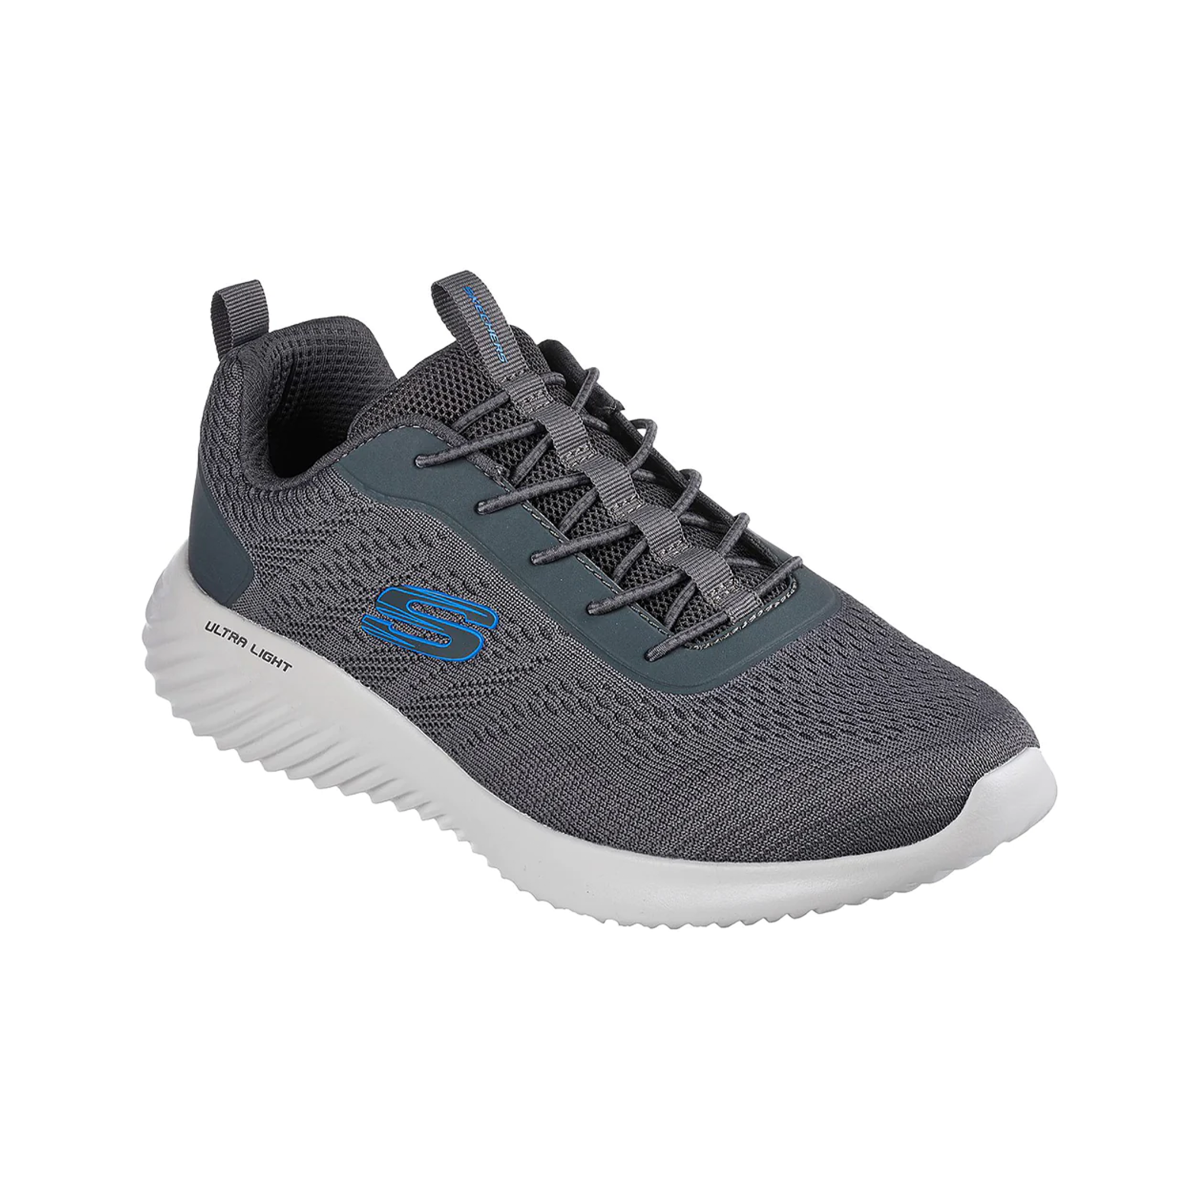 Skechers Sports Bounder Intread Shoes For Men, Charcoal